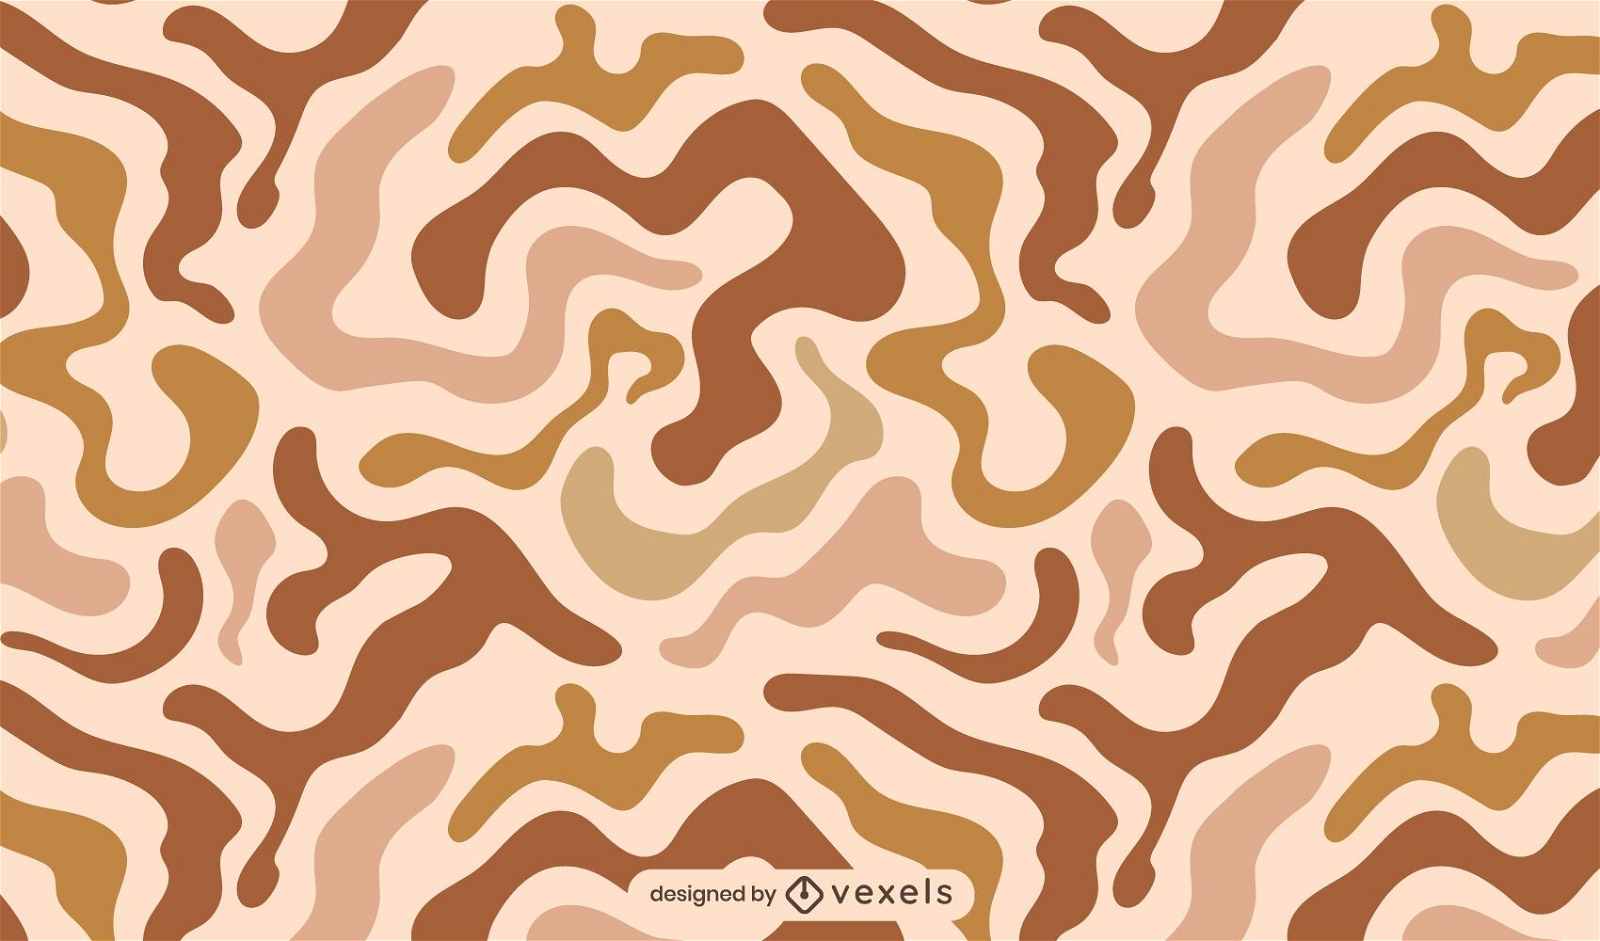 Abstract swirly shapes brown pattern